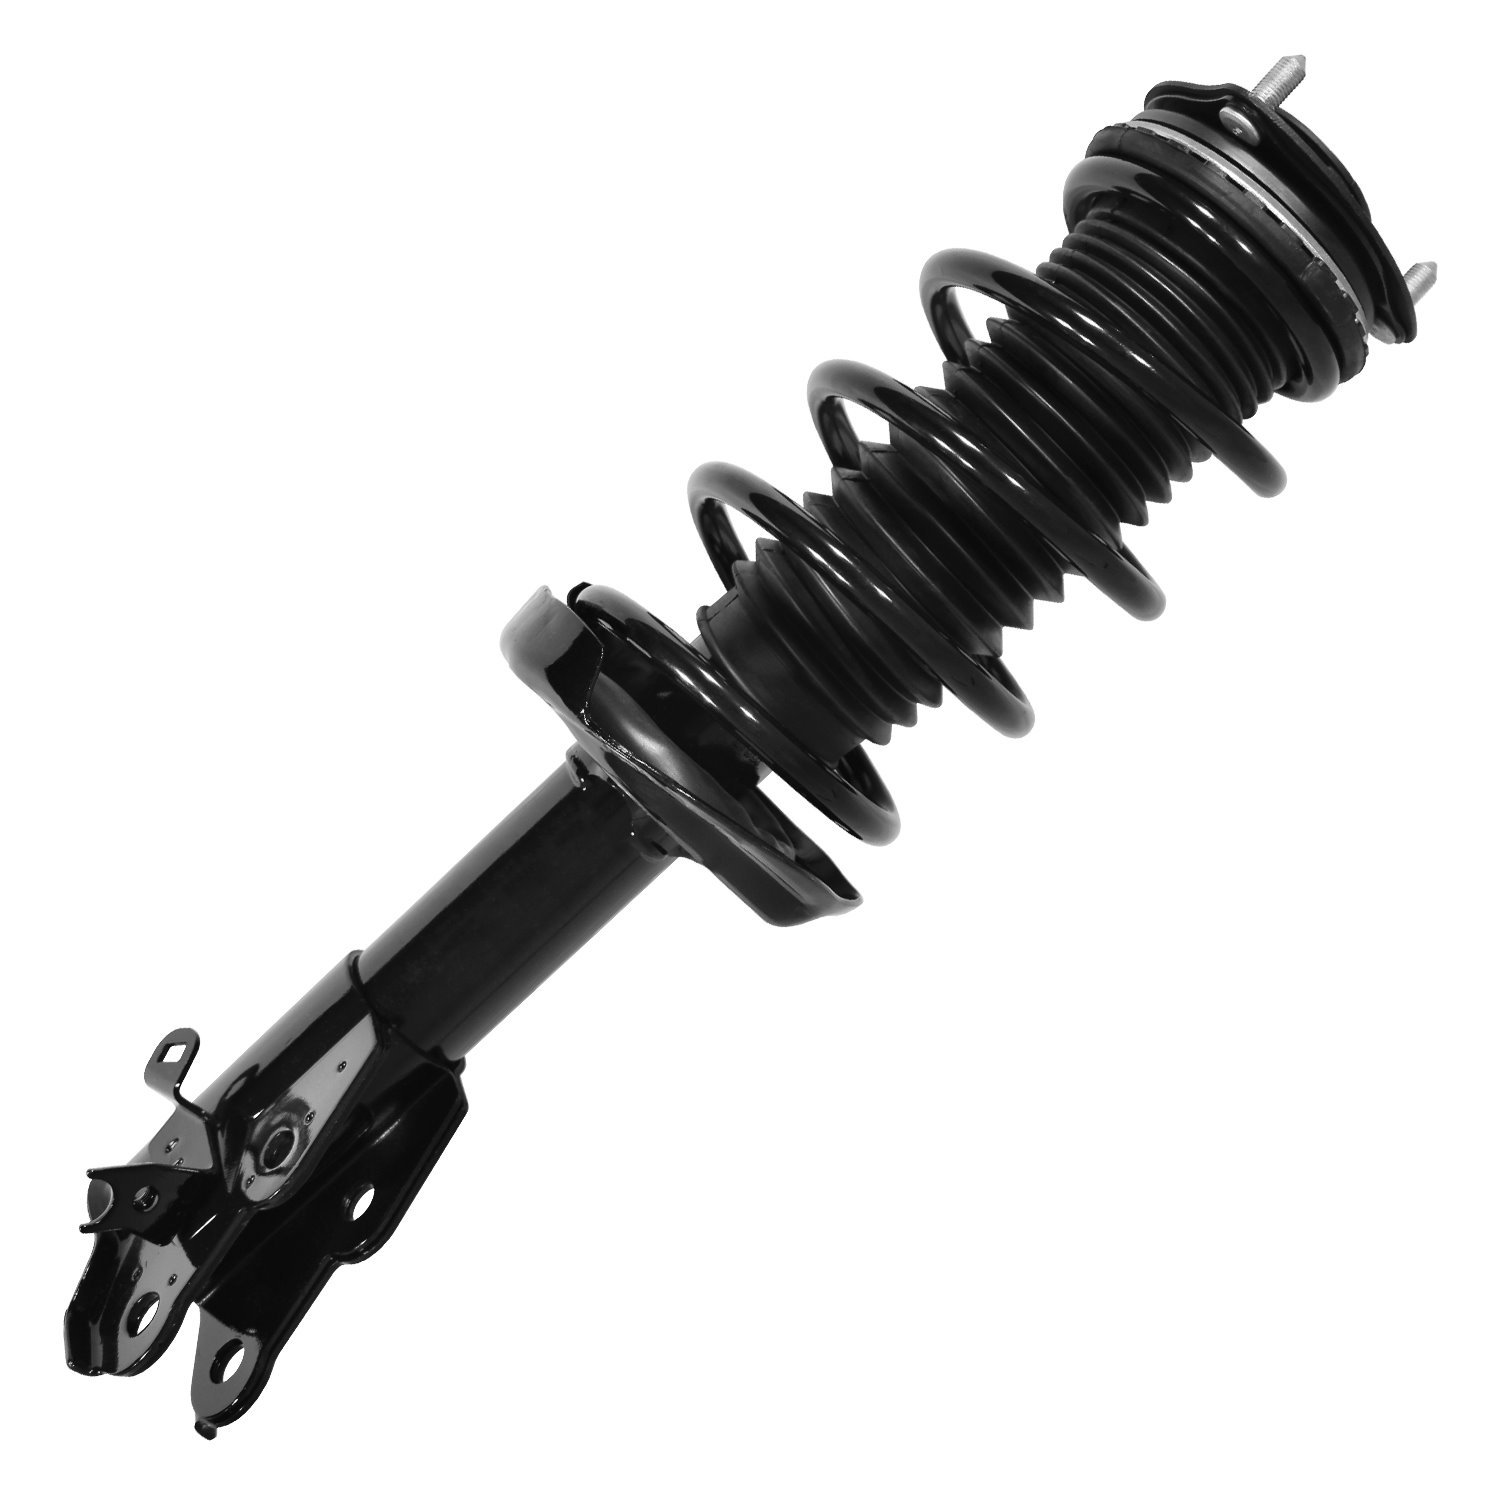 11816 Suspension Strut & Coil Spring Assembly Fits Select Acura CSX, Honda Civic